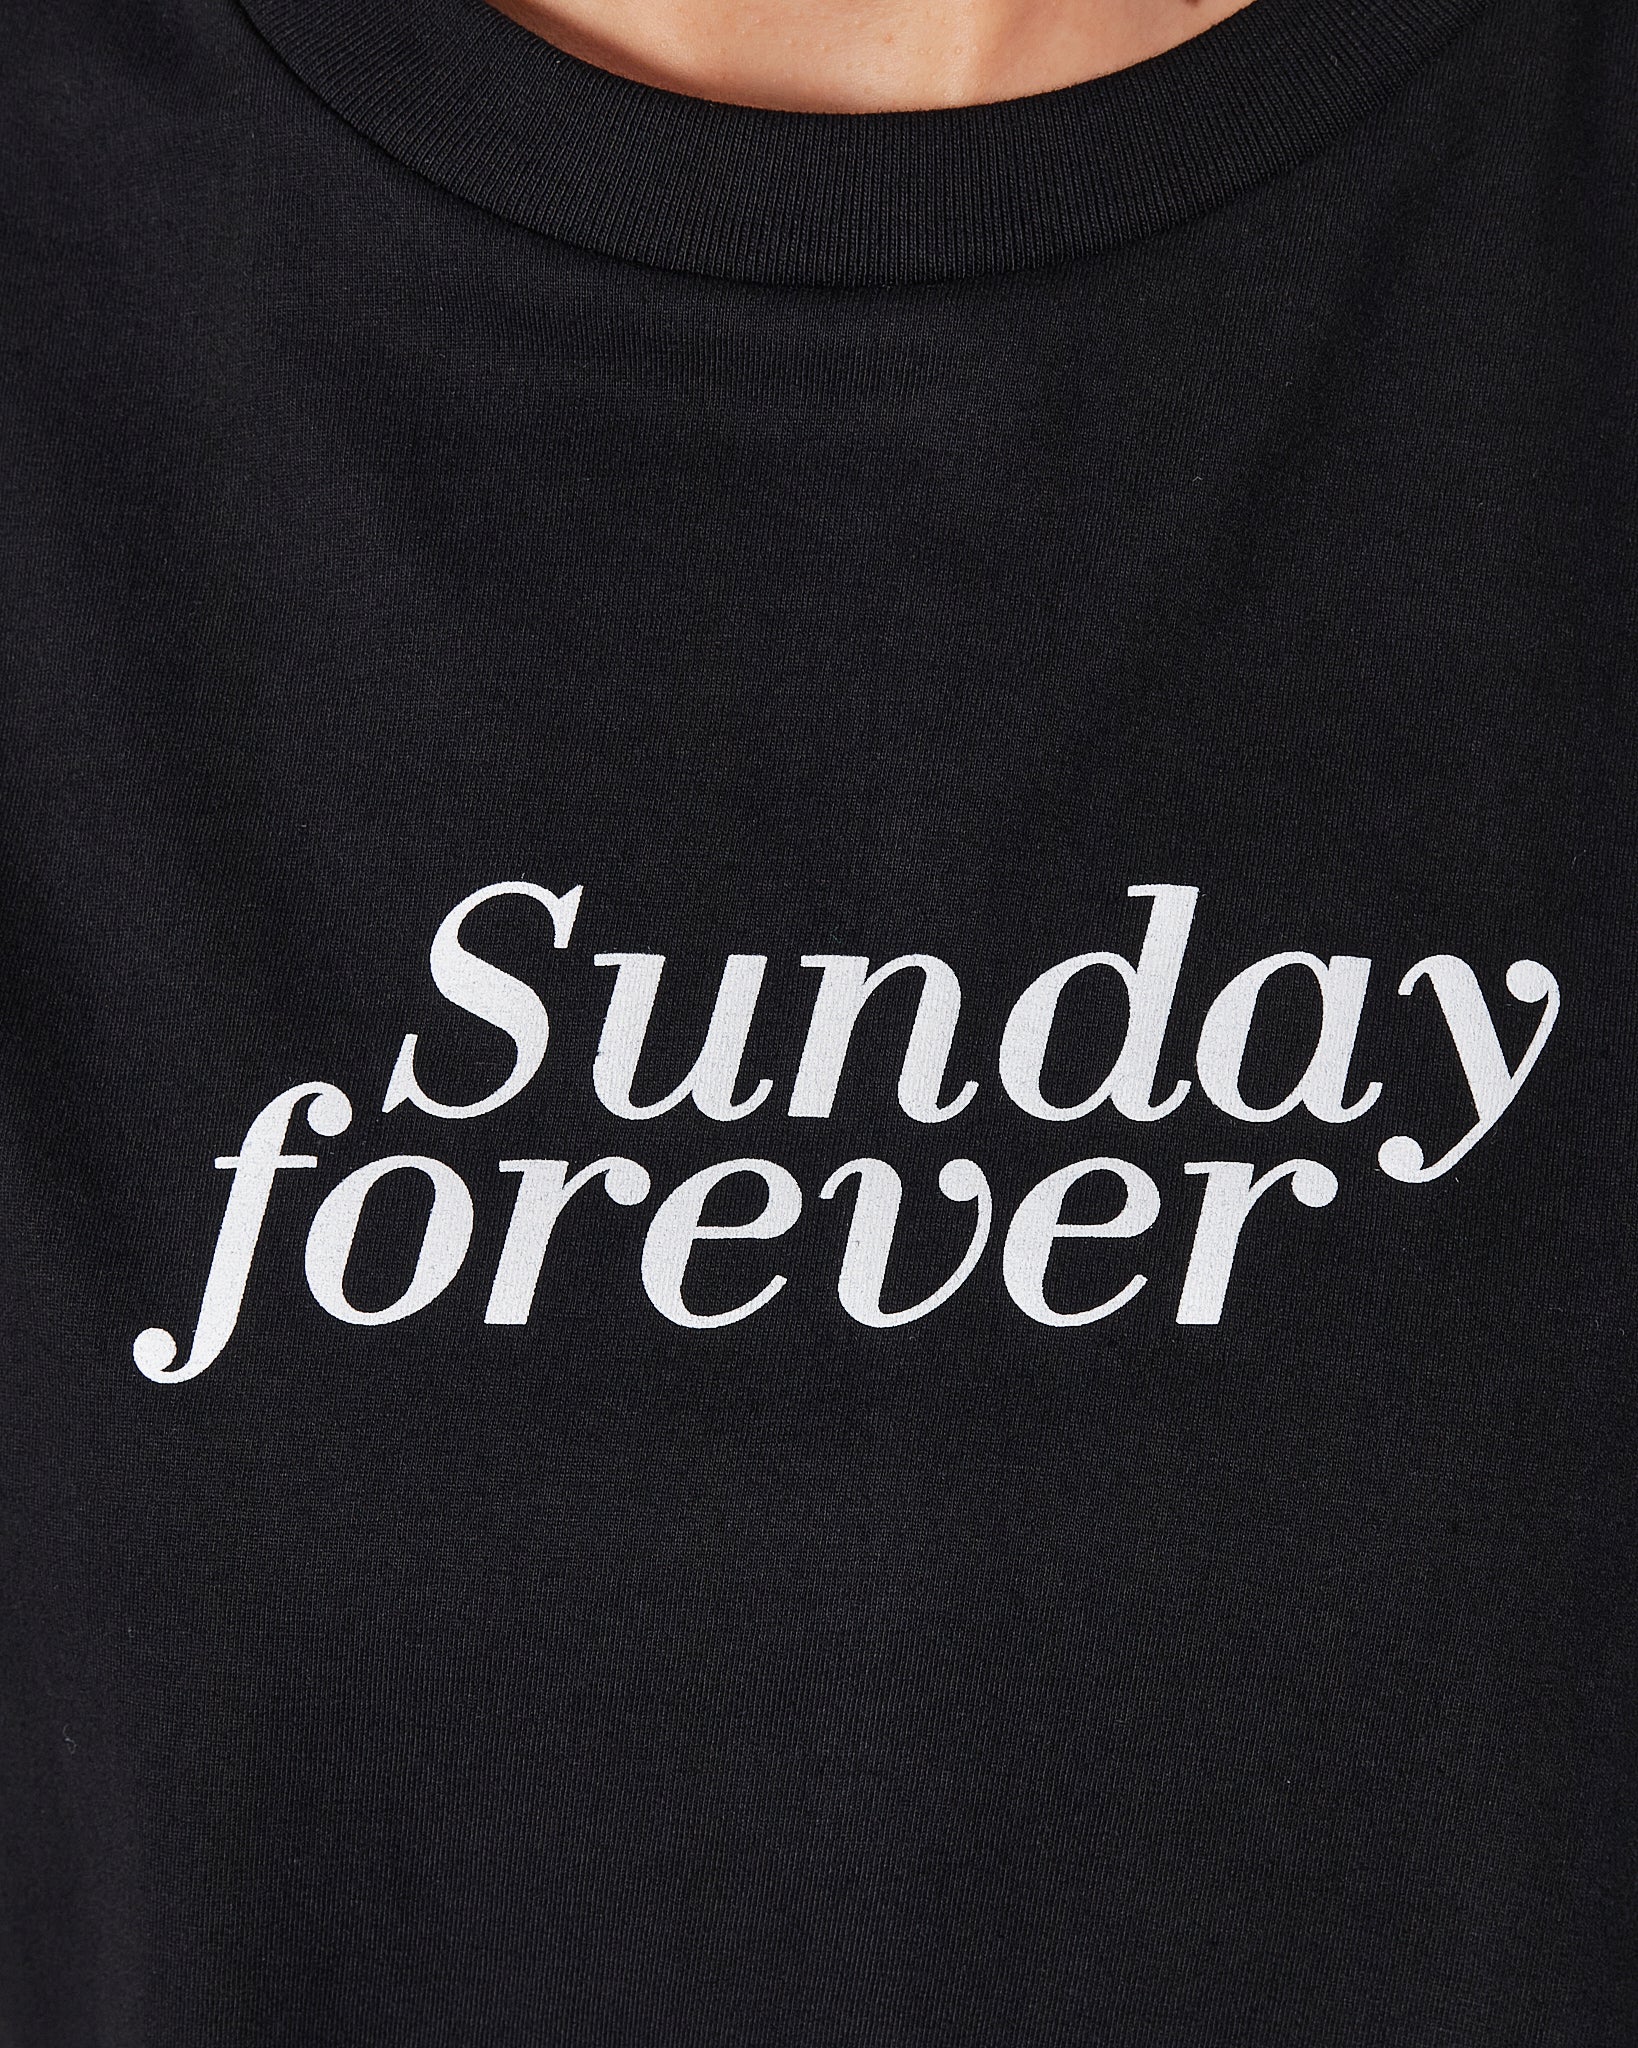 Sunday Forever Lady Black T-Shirt Crop Top 9.90